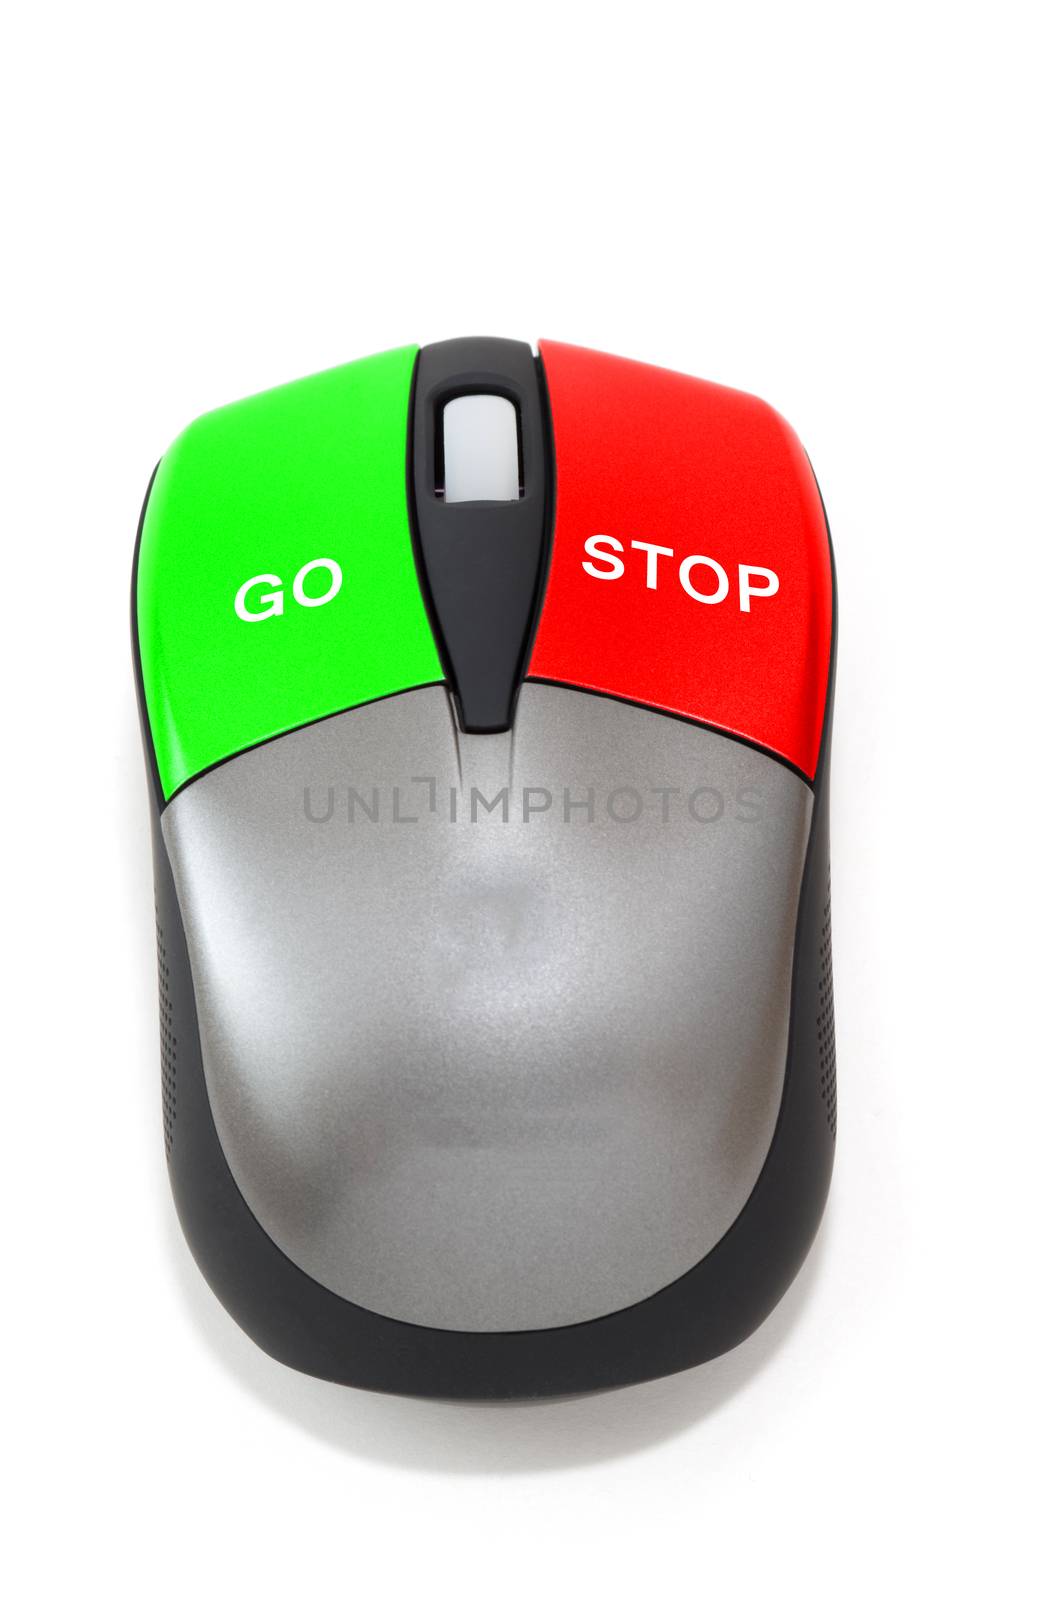 Stop and go concept with a mouse by daoleduc